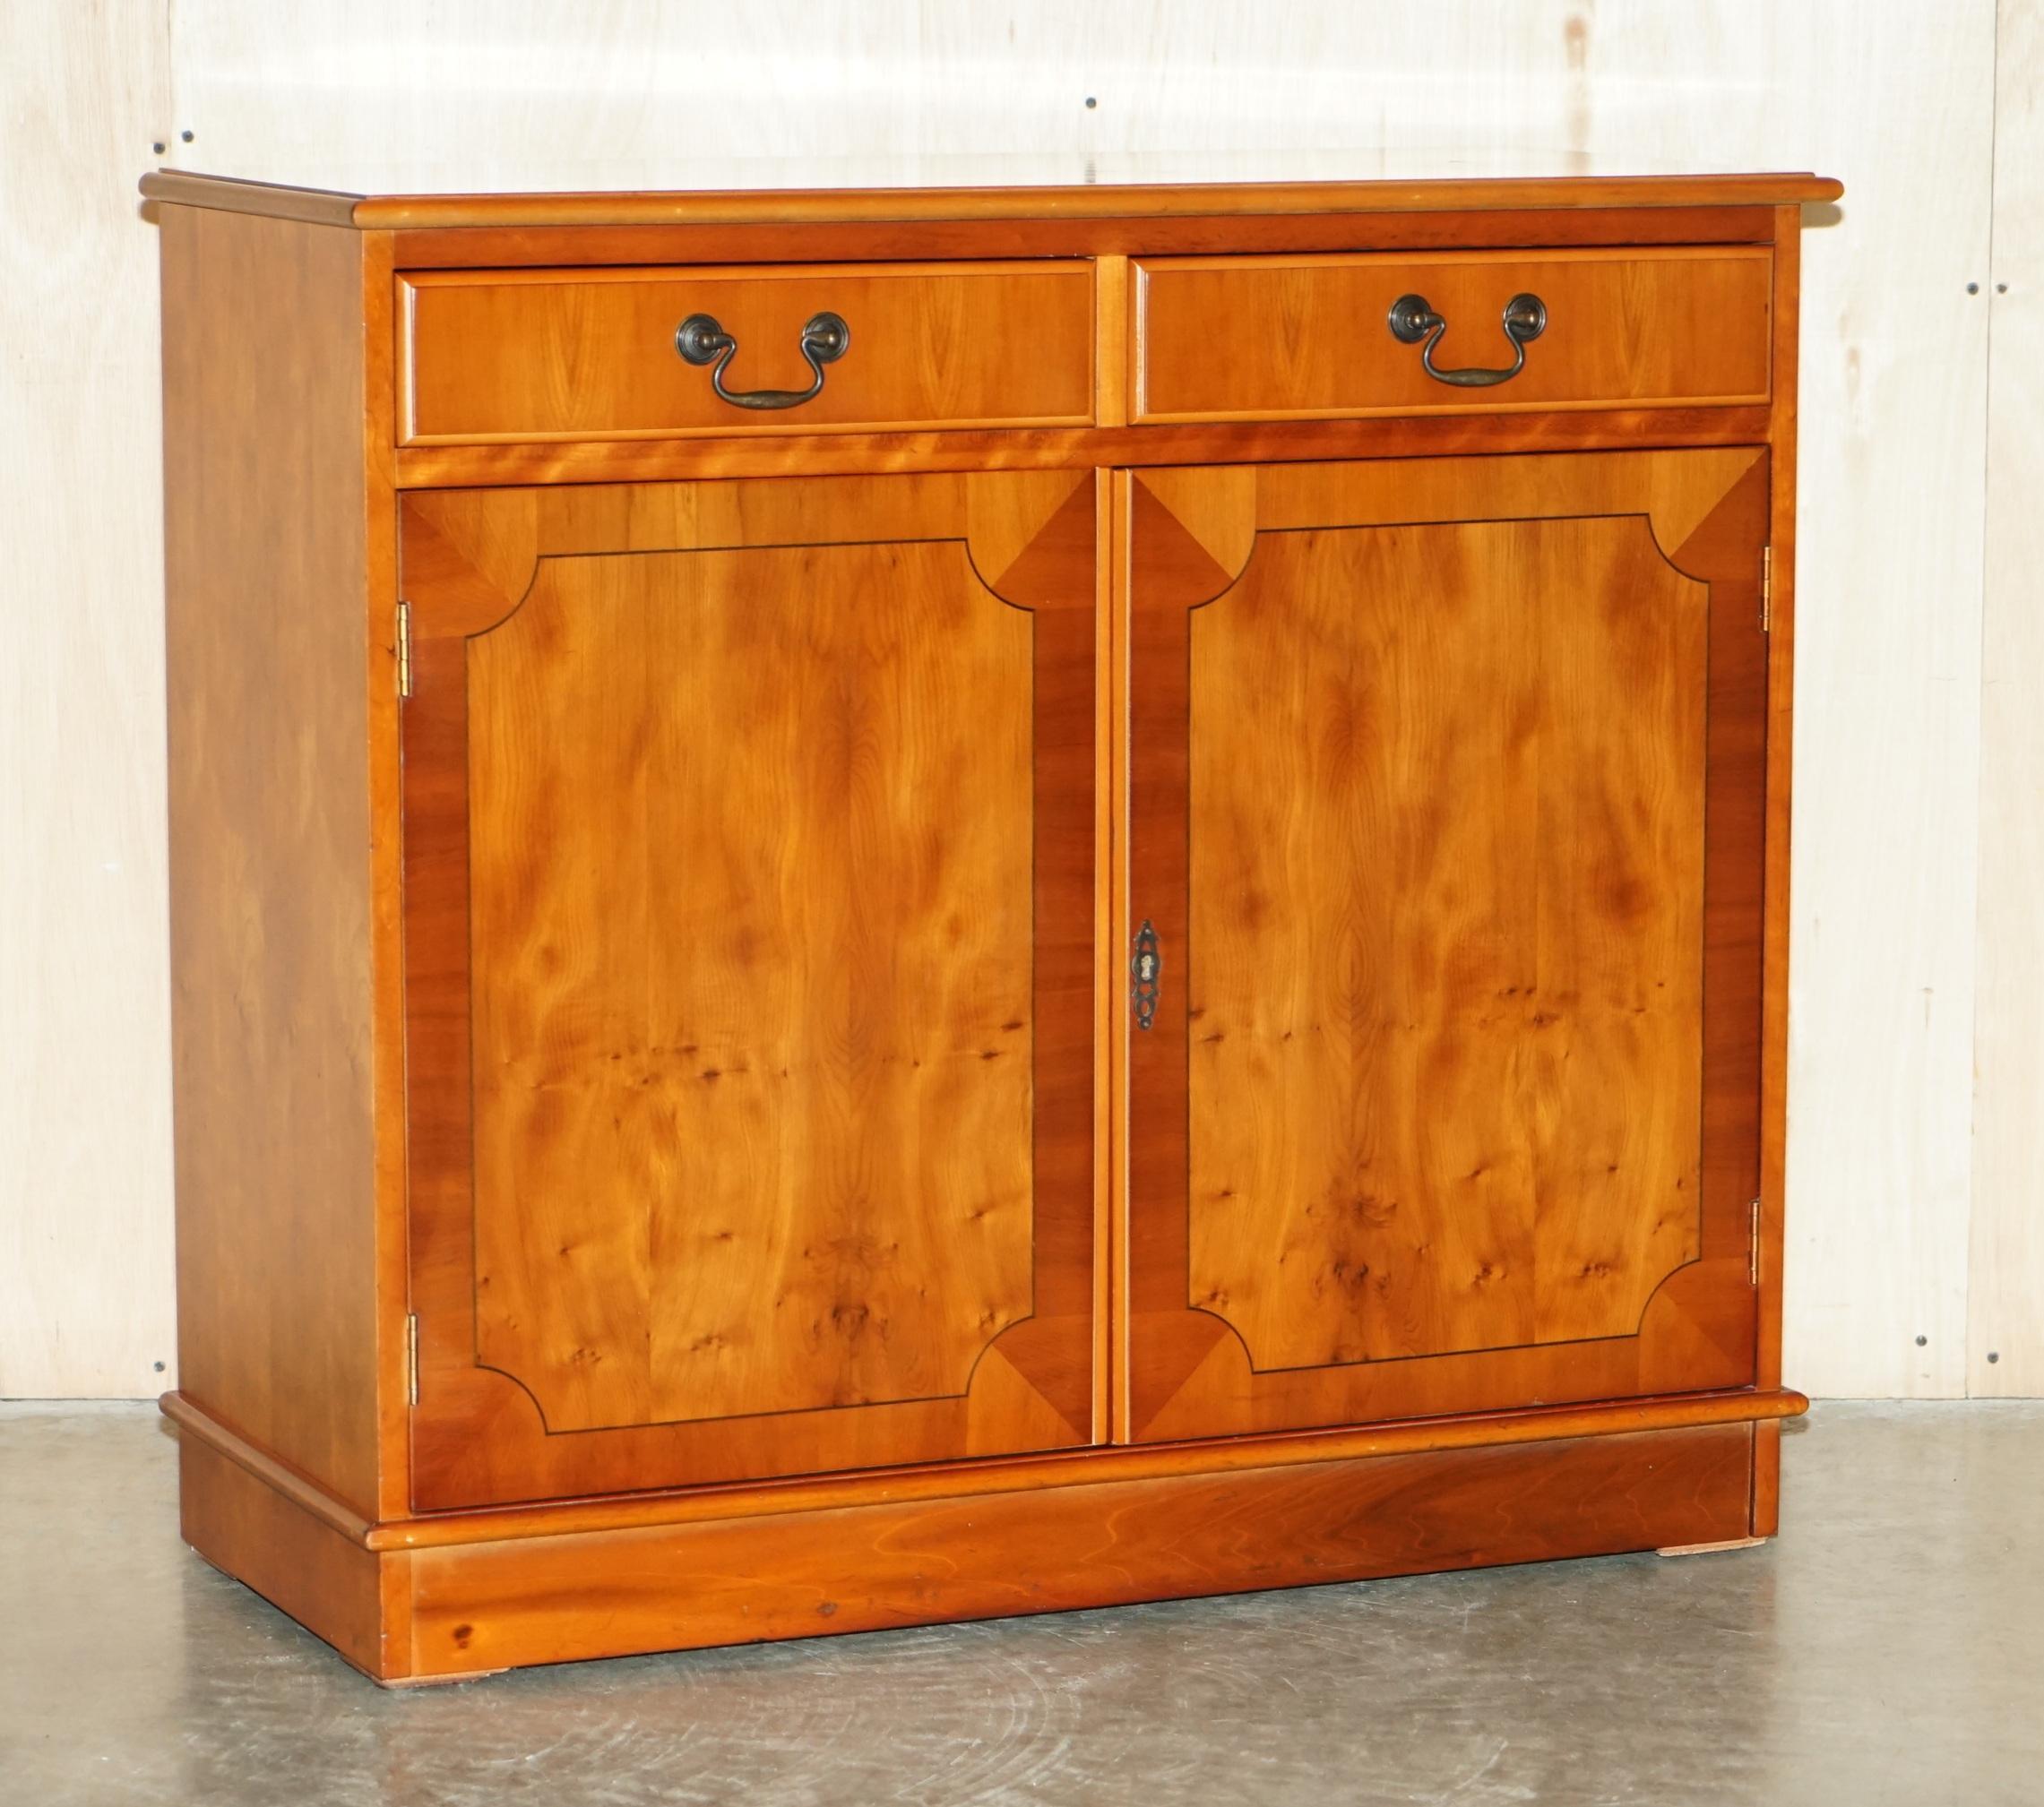 Royal House Antiques

Royal House Antiques is delighted to offer for sale this lovely burr yew wood two cupboard and drawer sideboard 

Please note the delivery fee listed is just a guide, it covers within the M25 only for the UK and local Europe